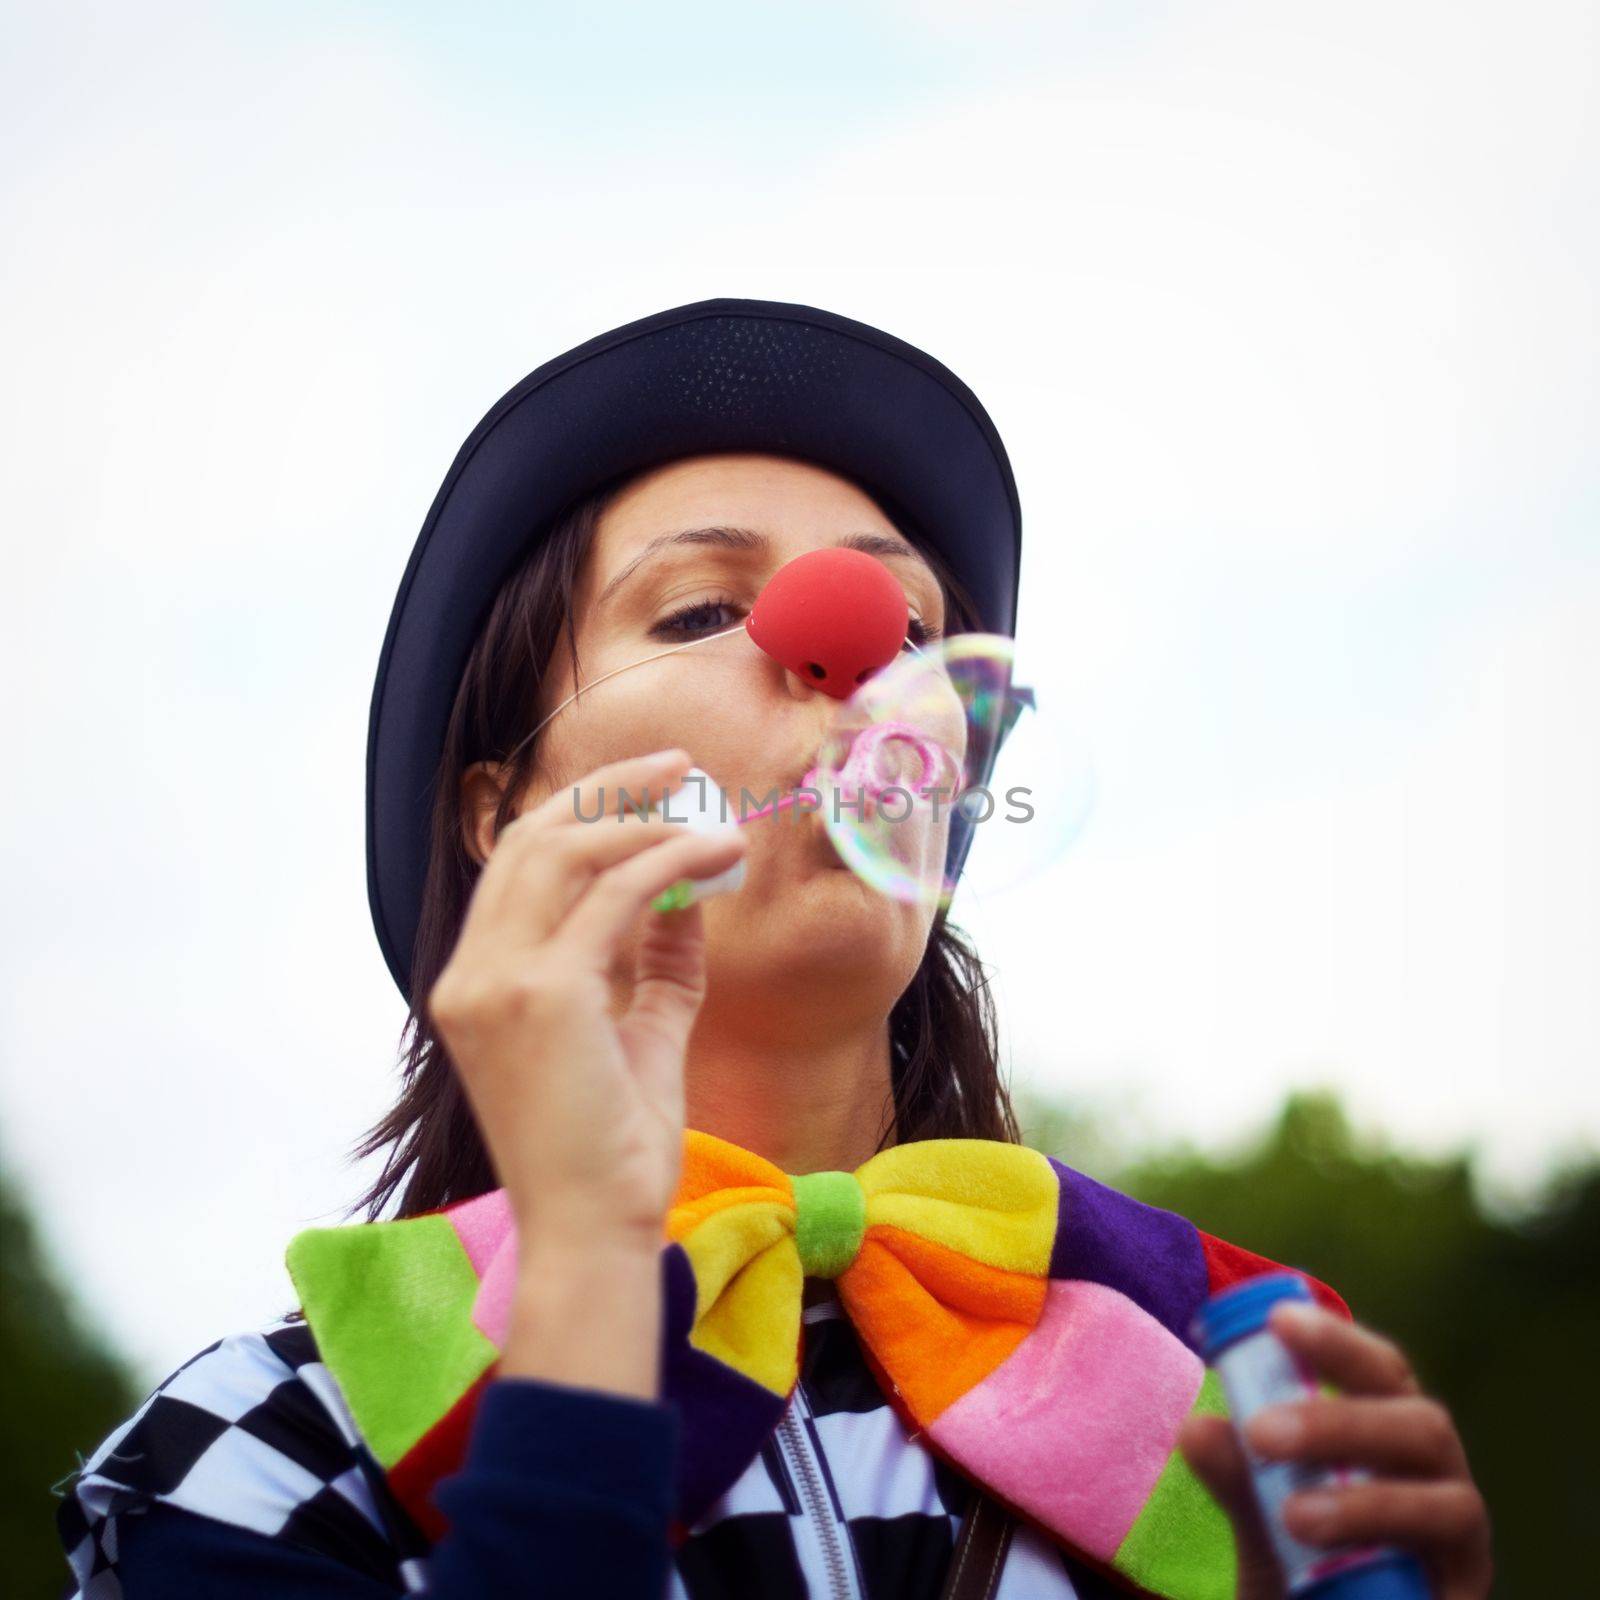 Make the bubble bigger. a clown blowing bubbles at an outdoor festival. by YuriArcurs